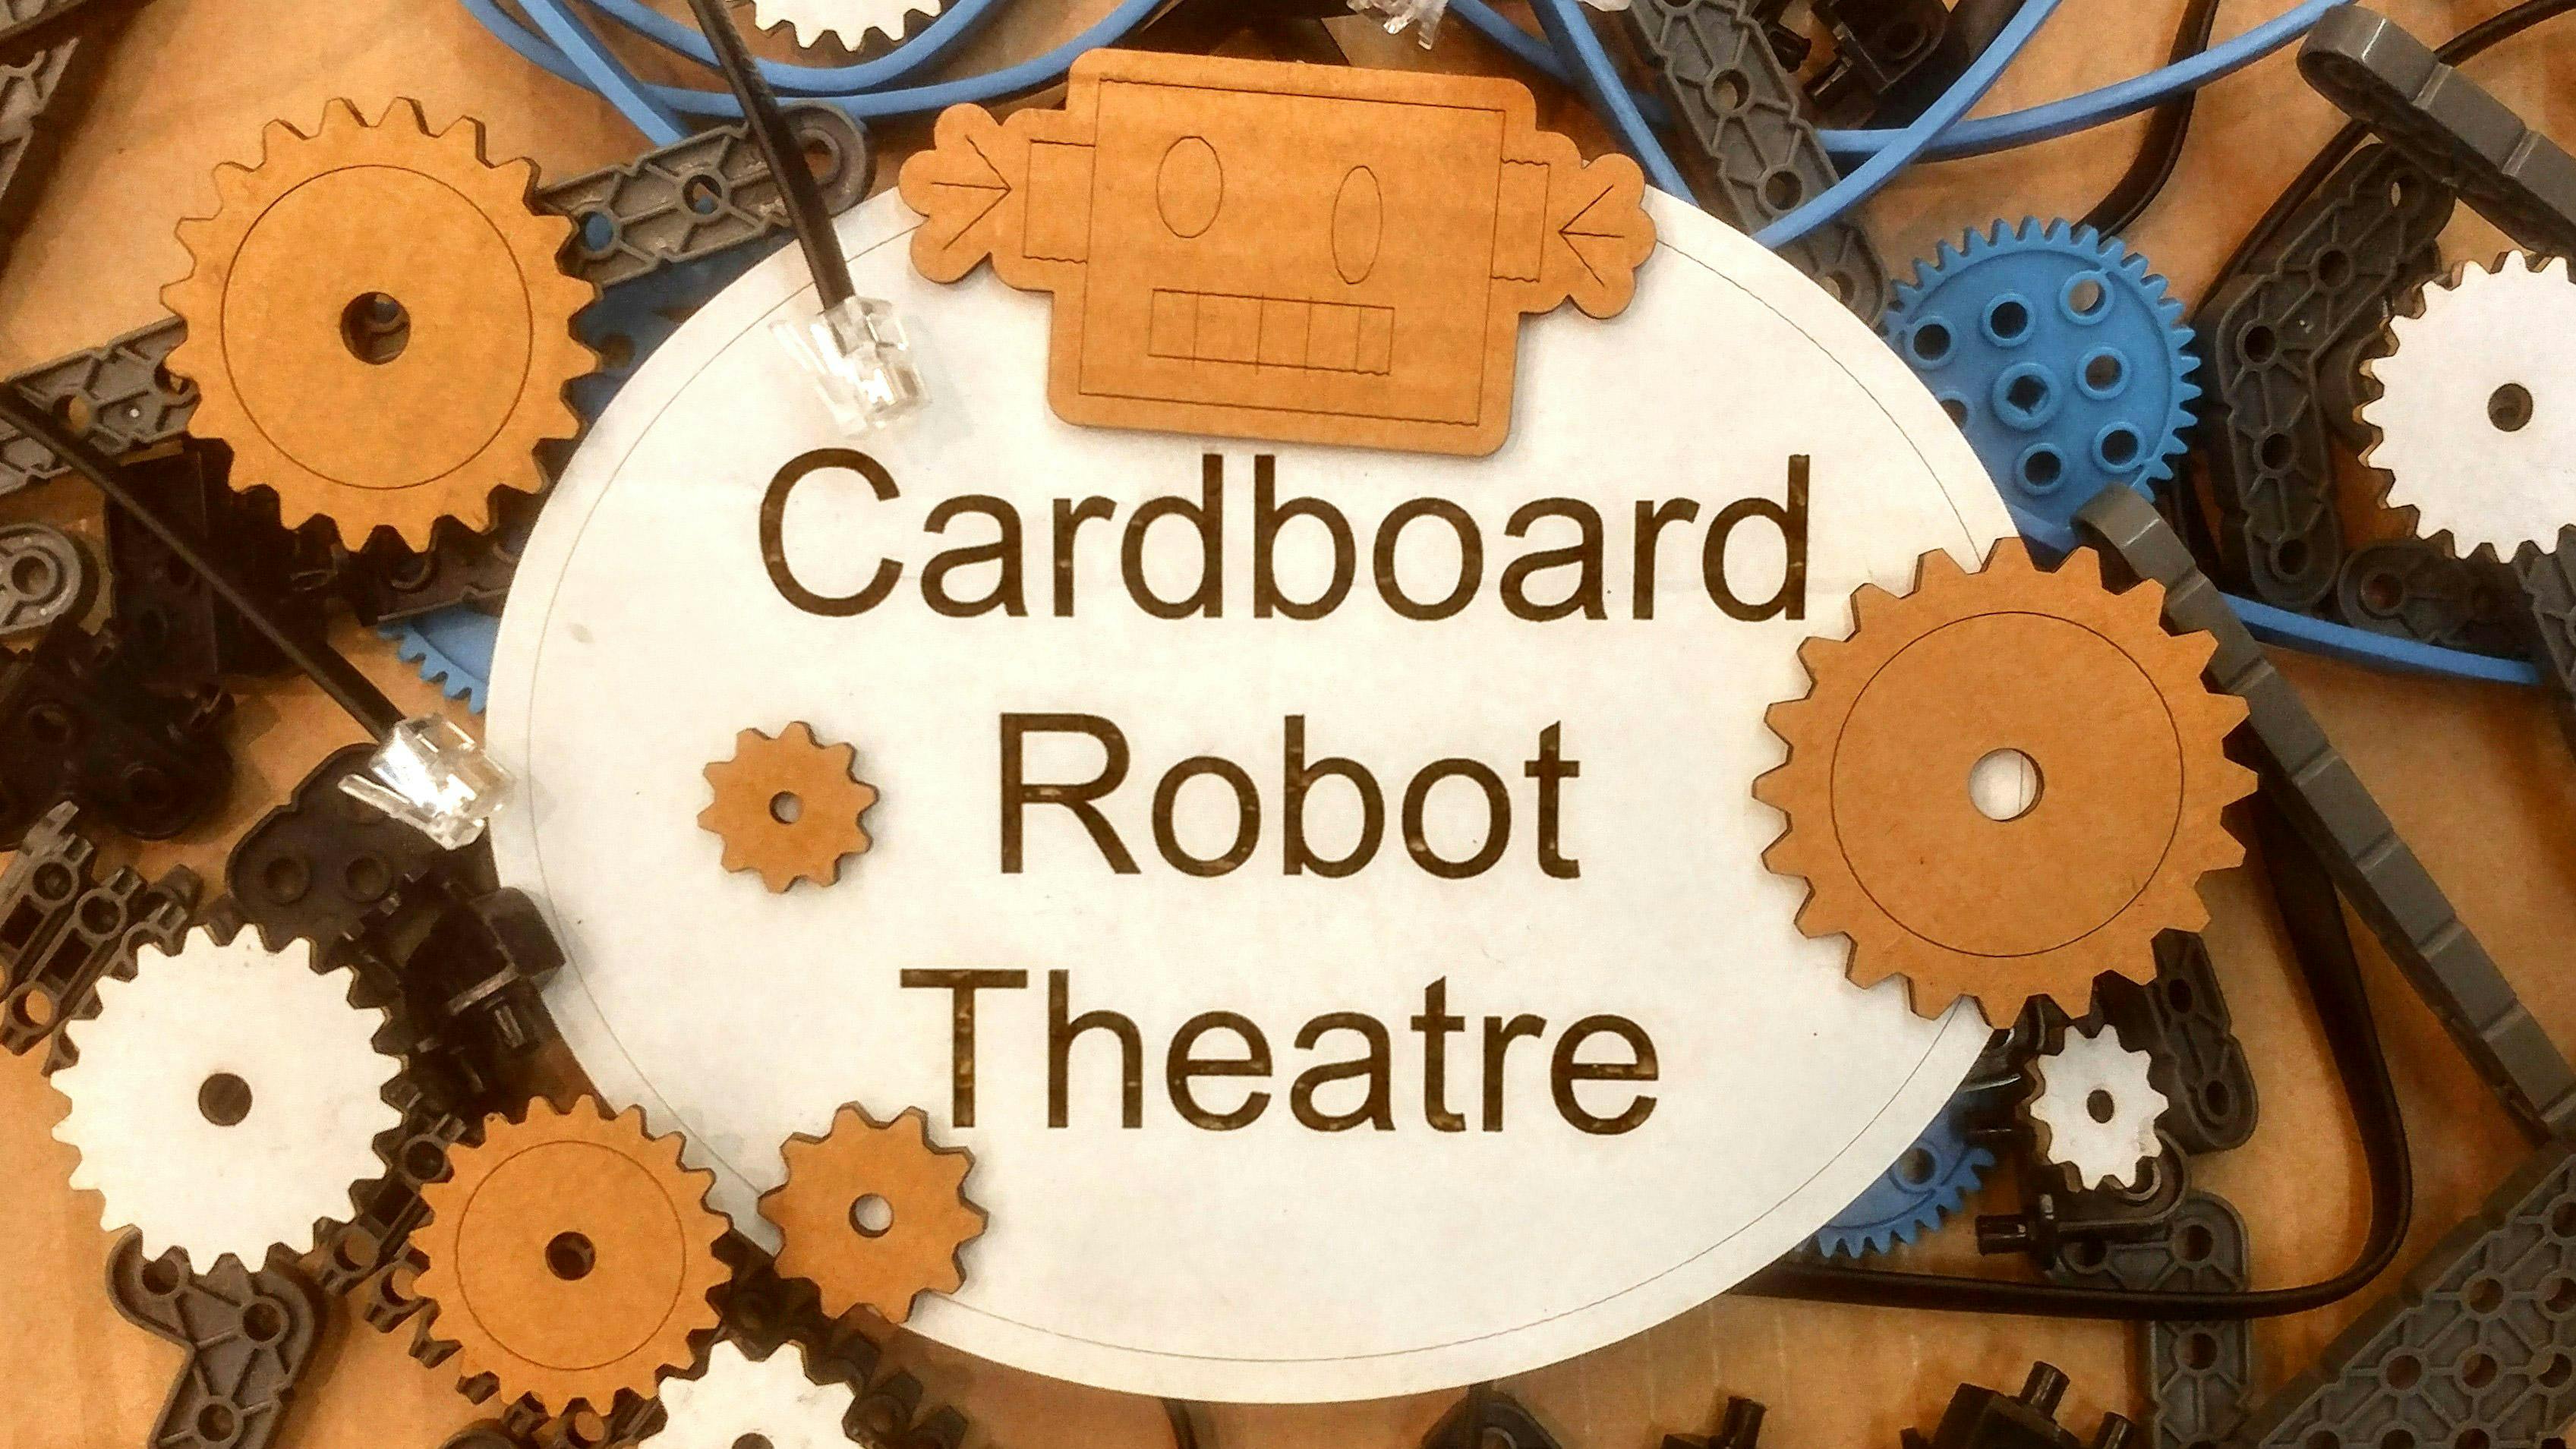 Cardboard Robot Theatre Workshop @ The Youthie 12-18yrs!